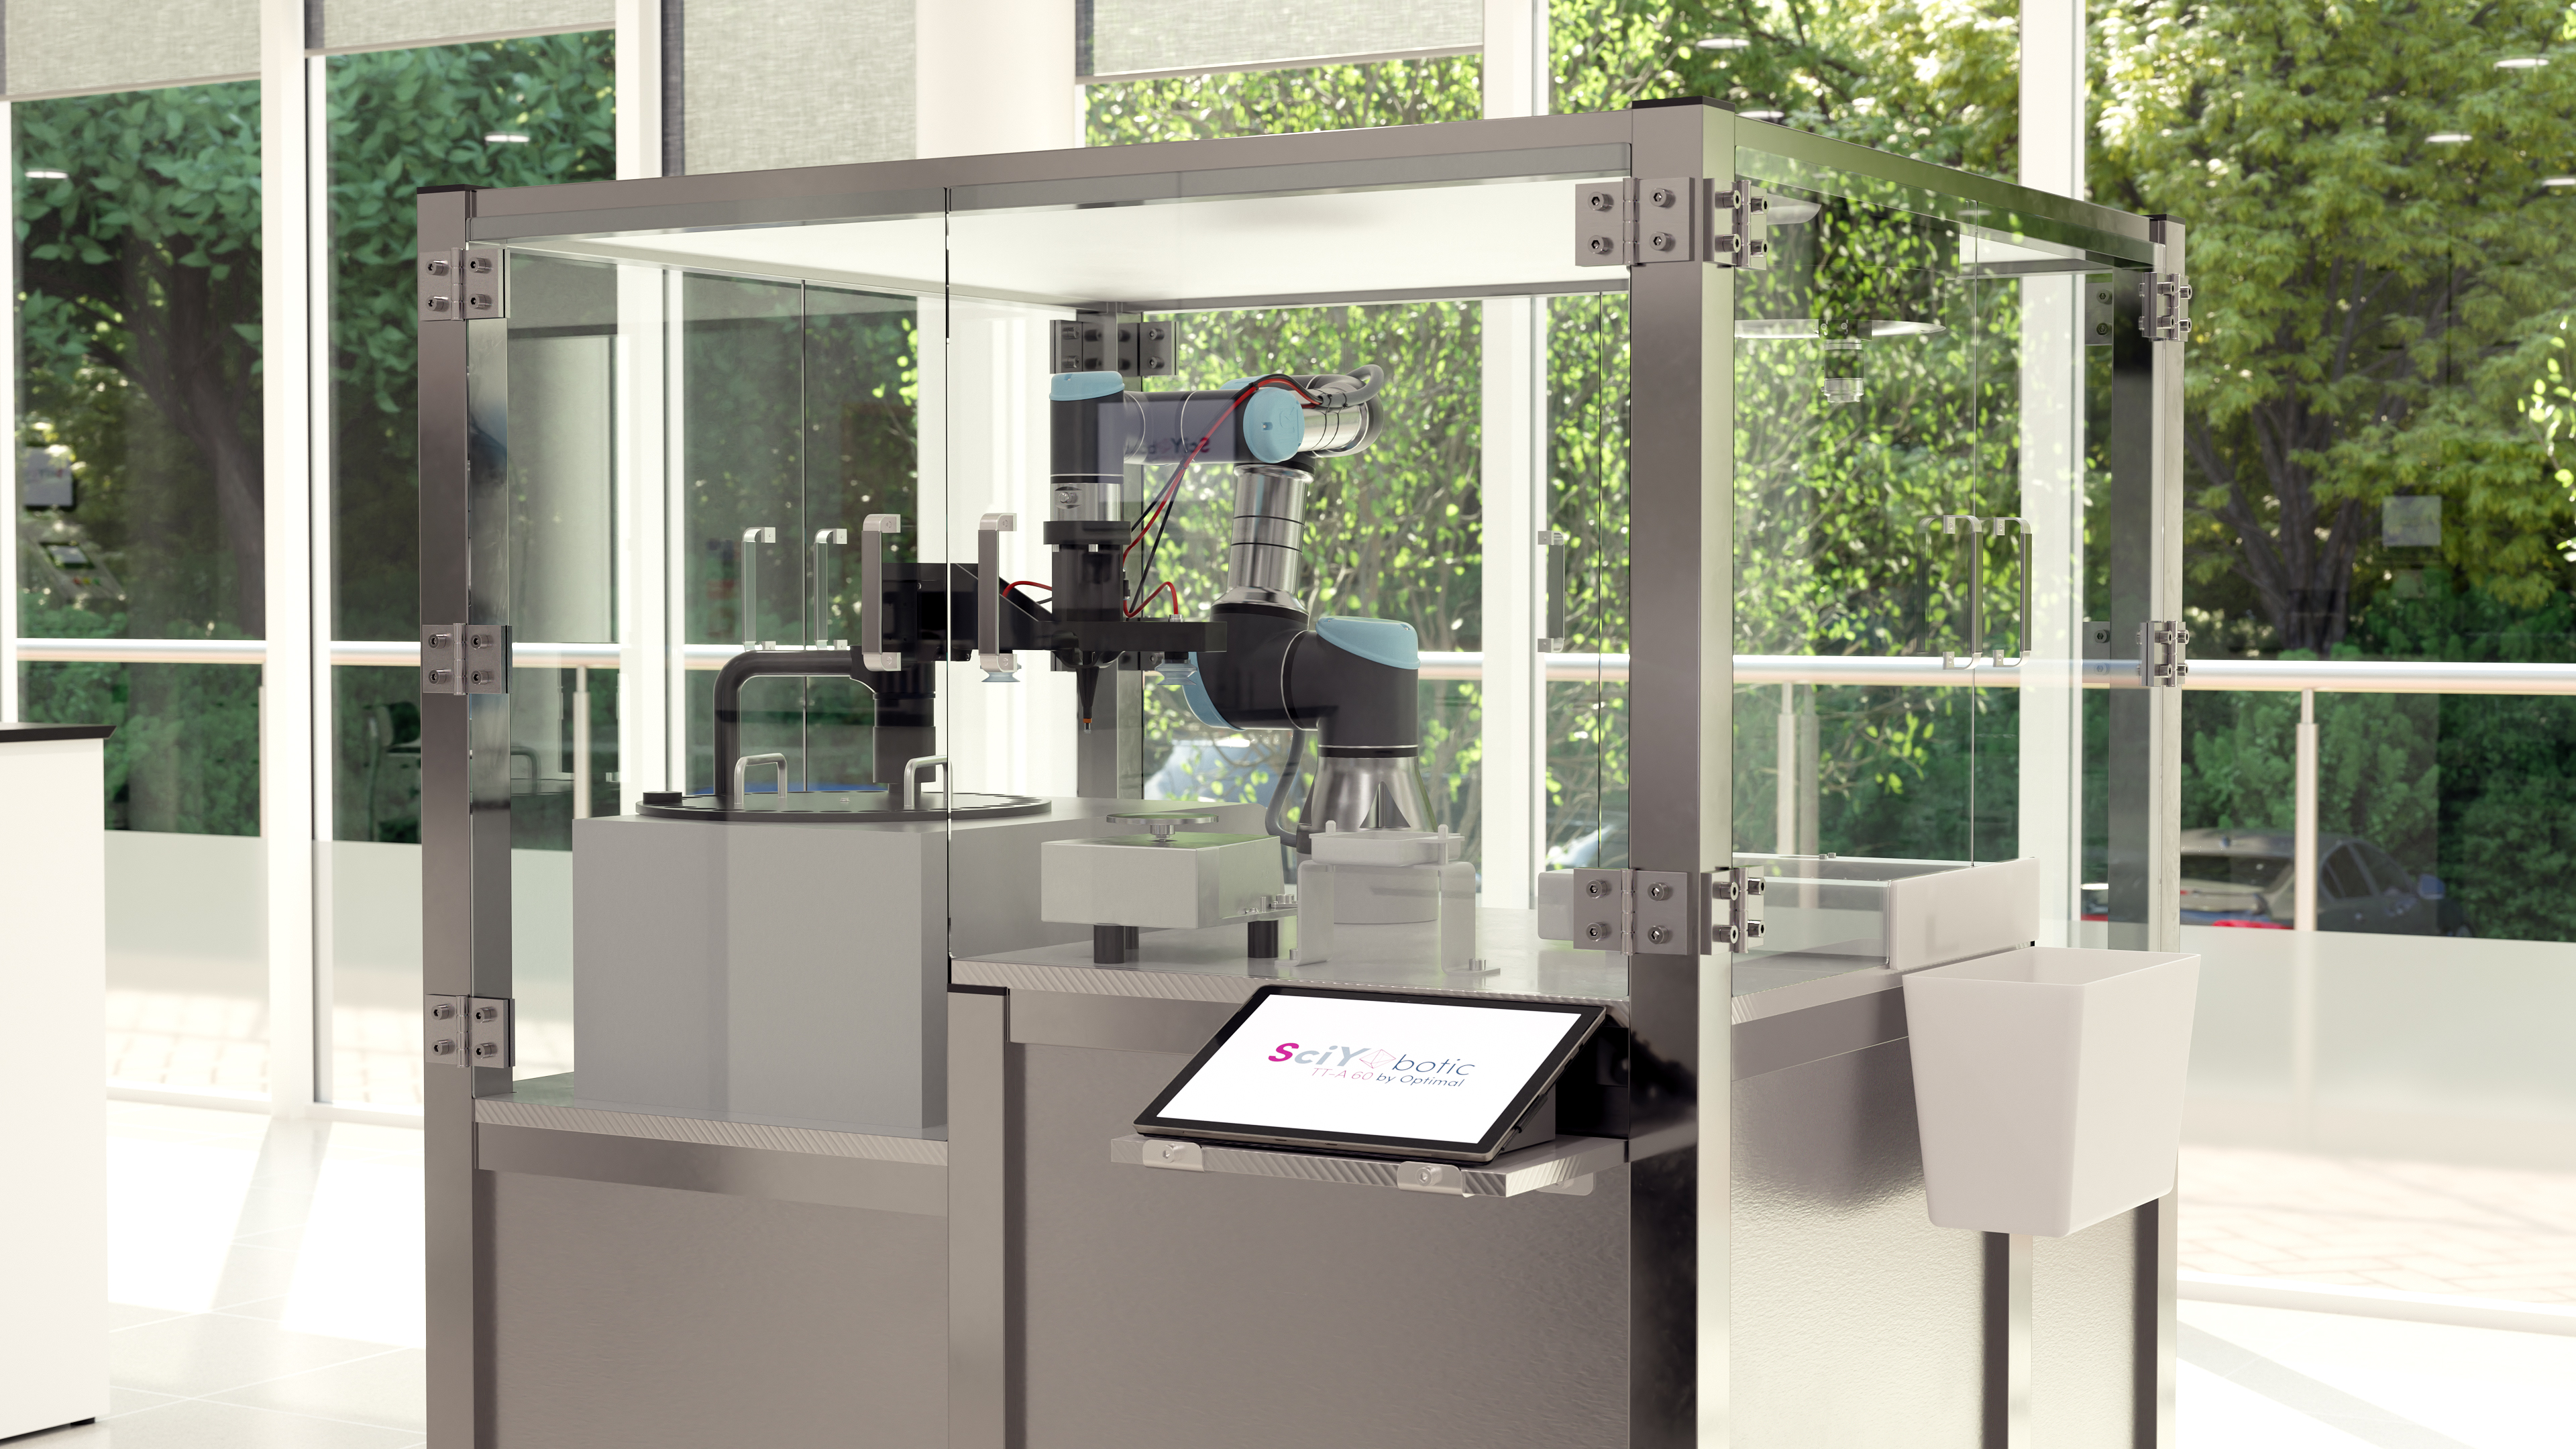 The SciY platform of advanced, vendor-agnostic scientific software and automation technologies is expanding with the launch of the cutting-edge SciYbotic range of tablet testing (TT) automated Quality Test Machines.